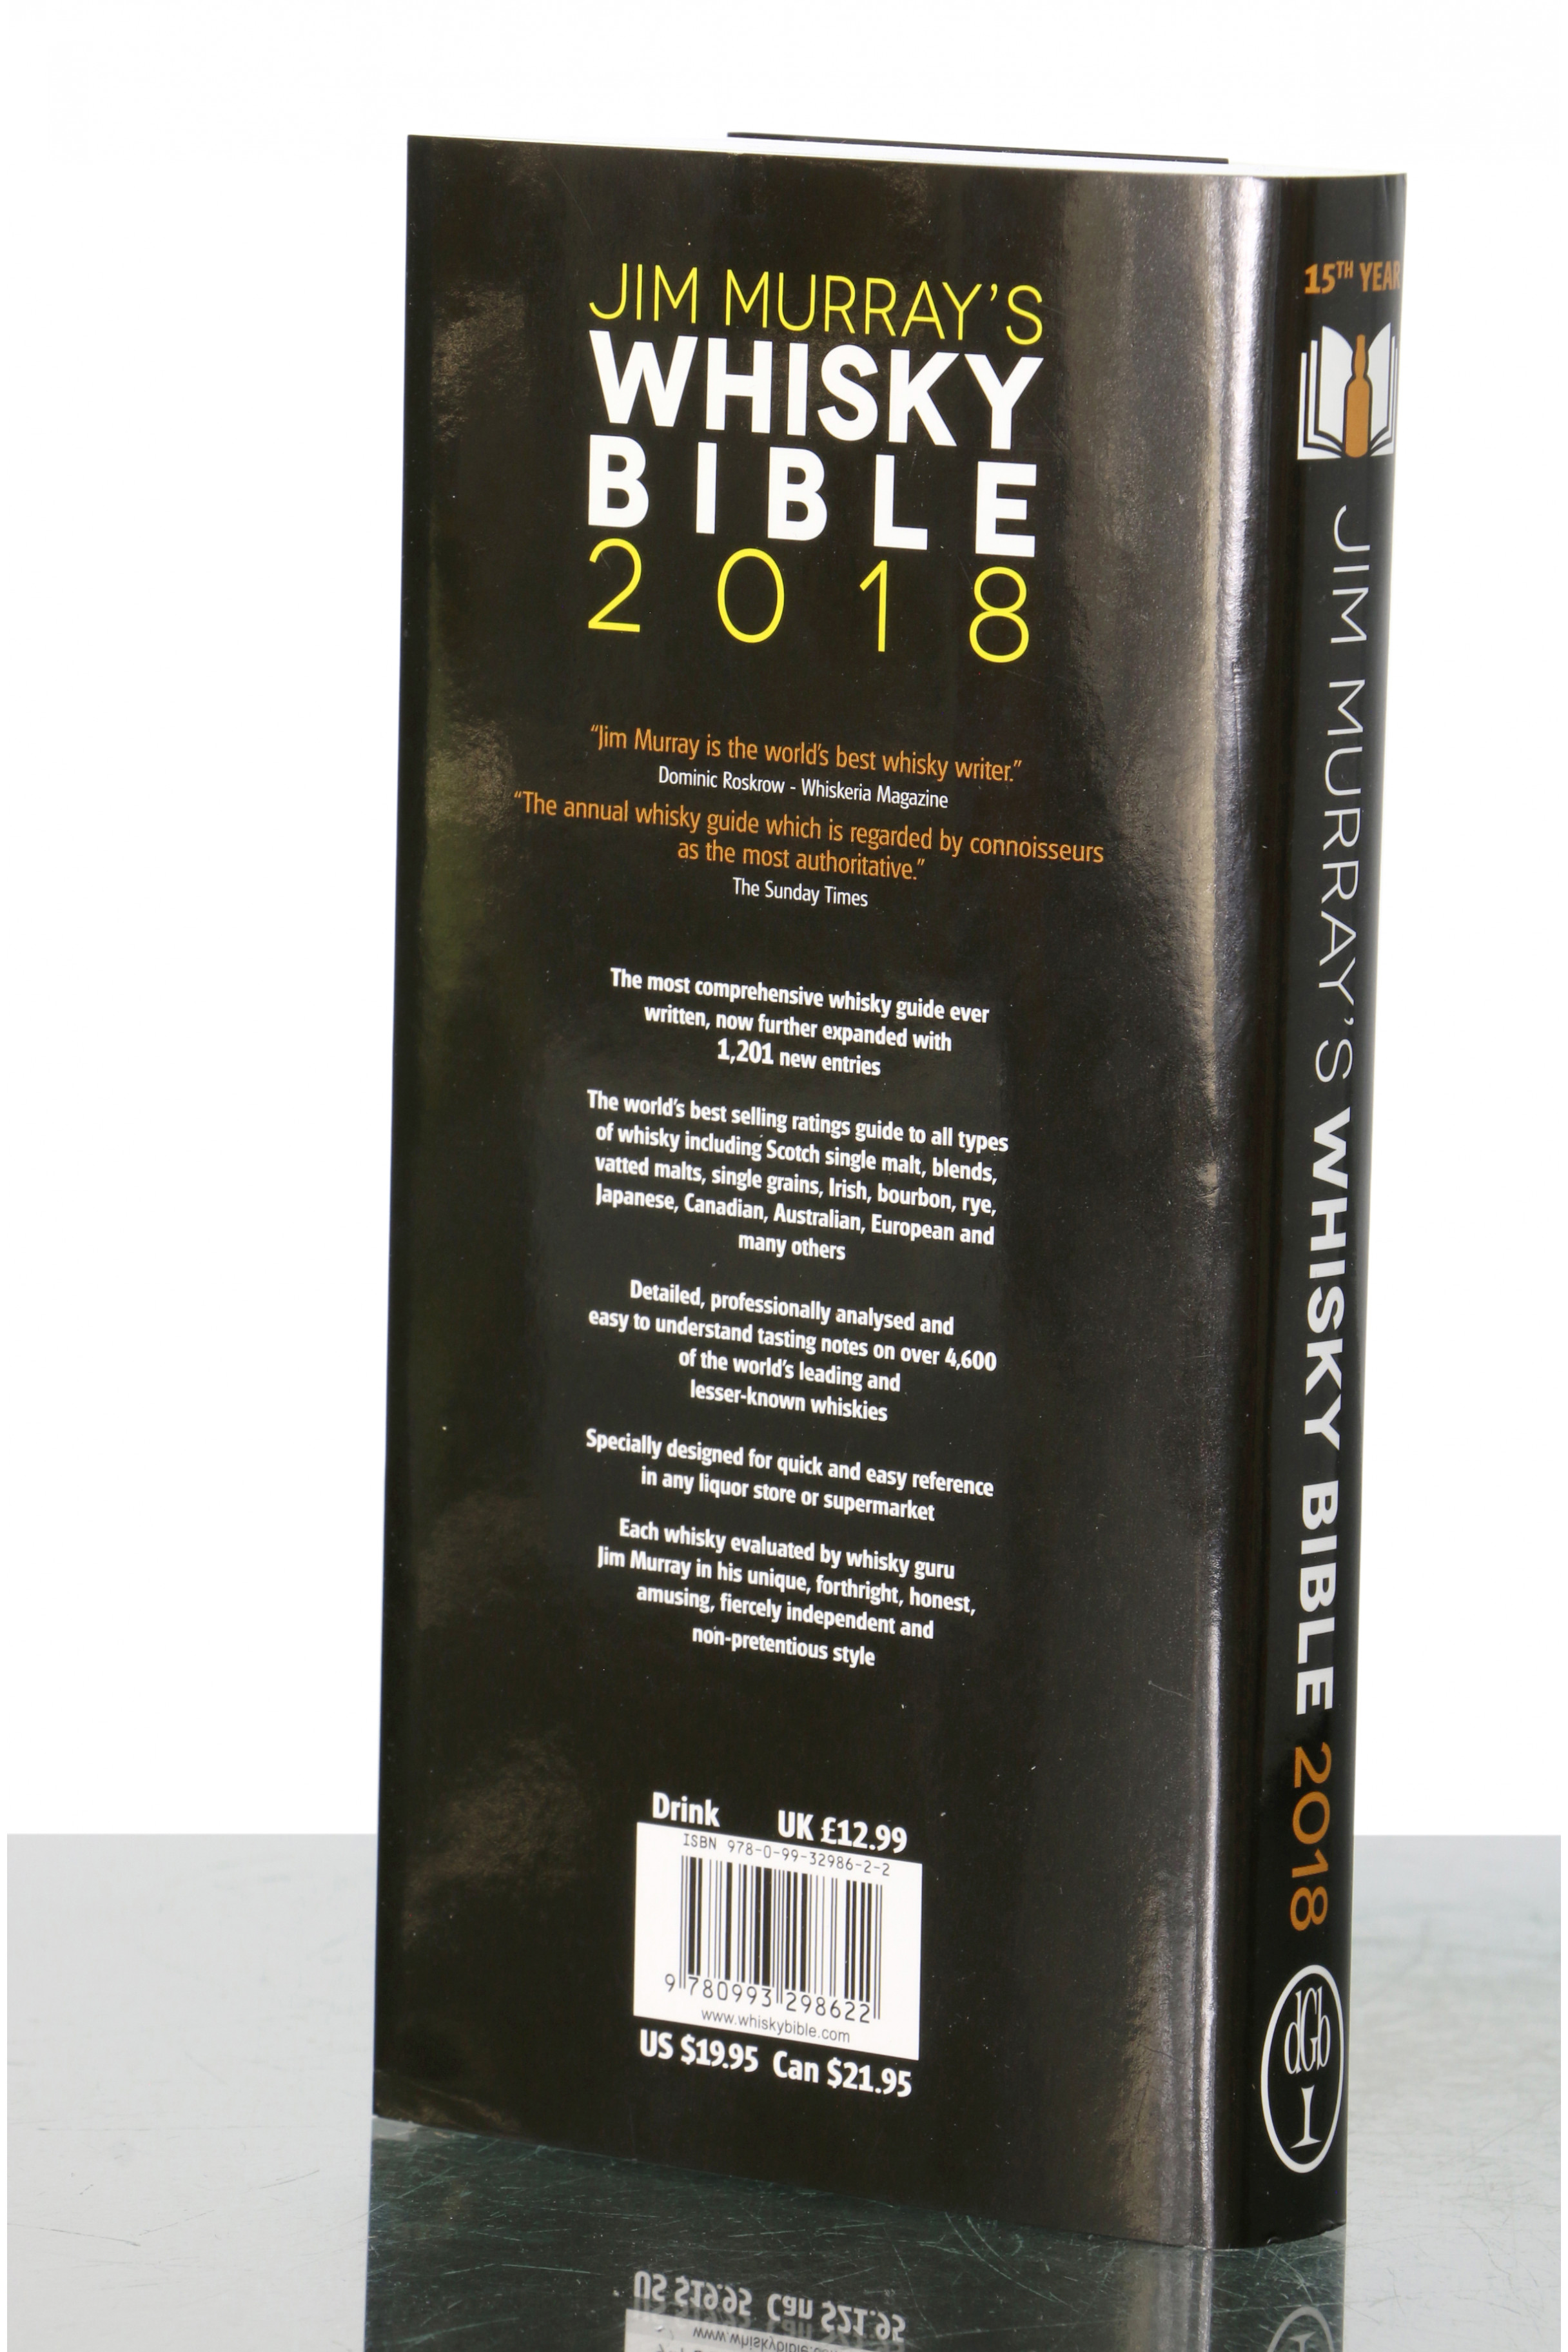 Jim Murray's Whisky Bible 2018 Just Whisky Auctions